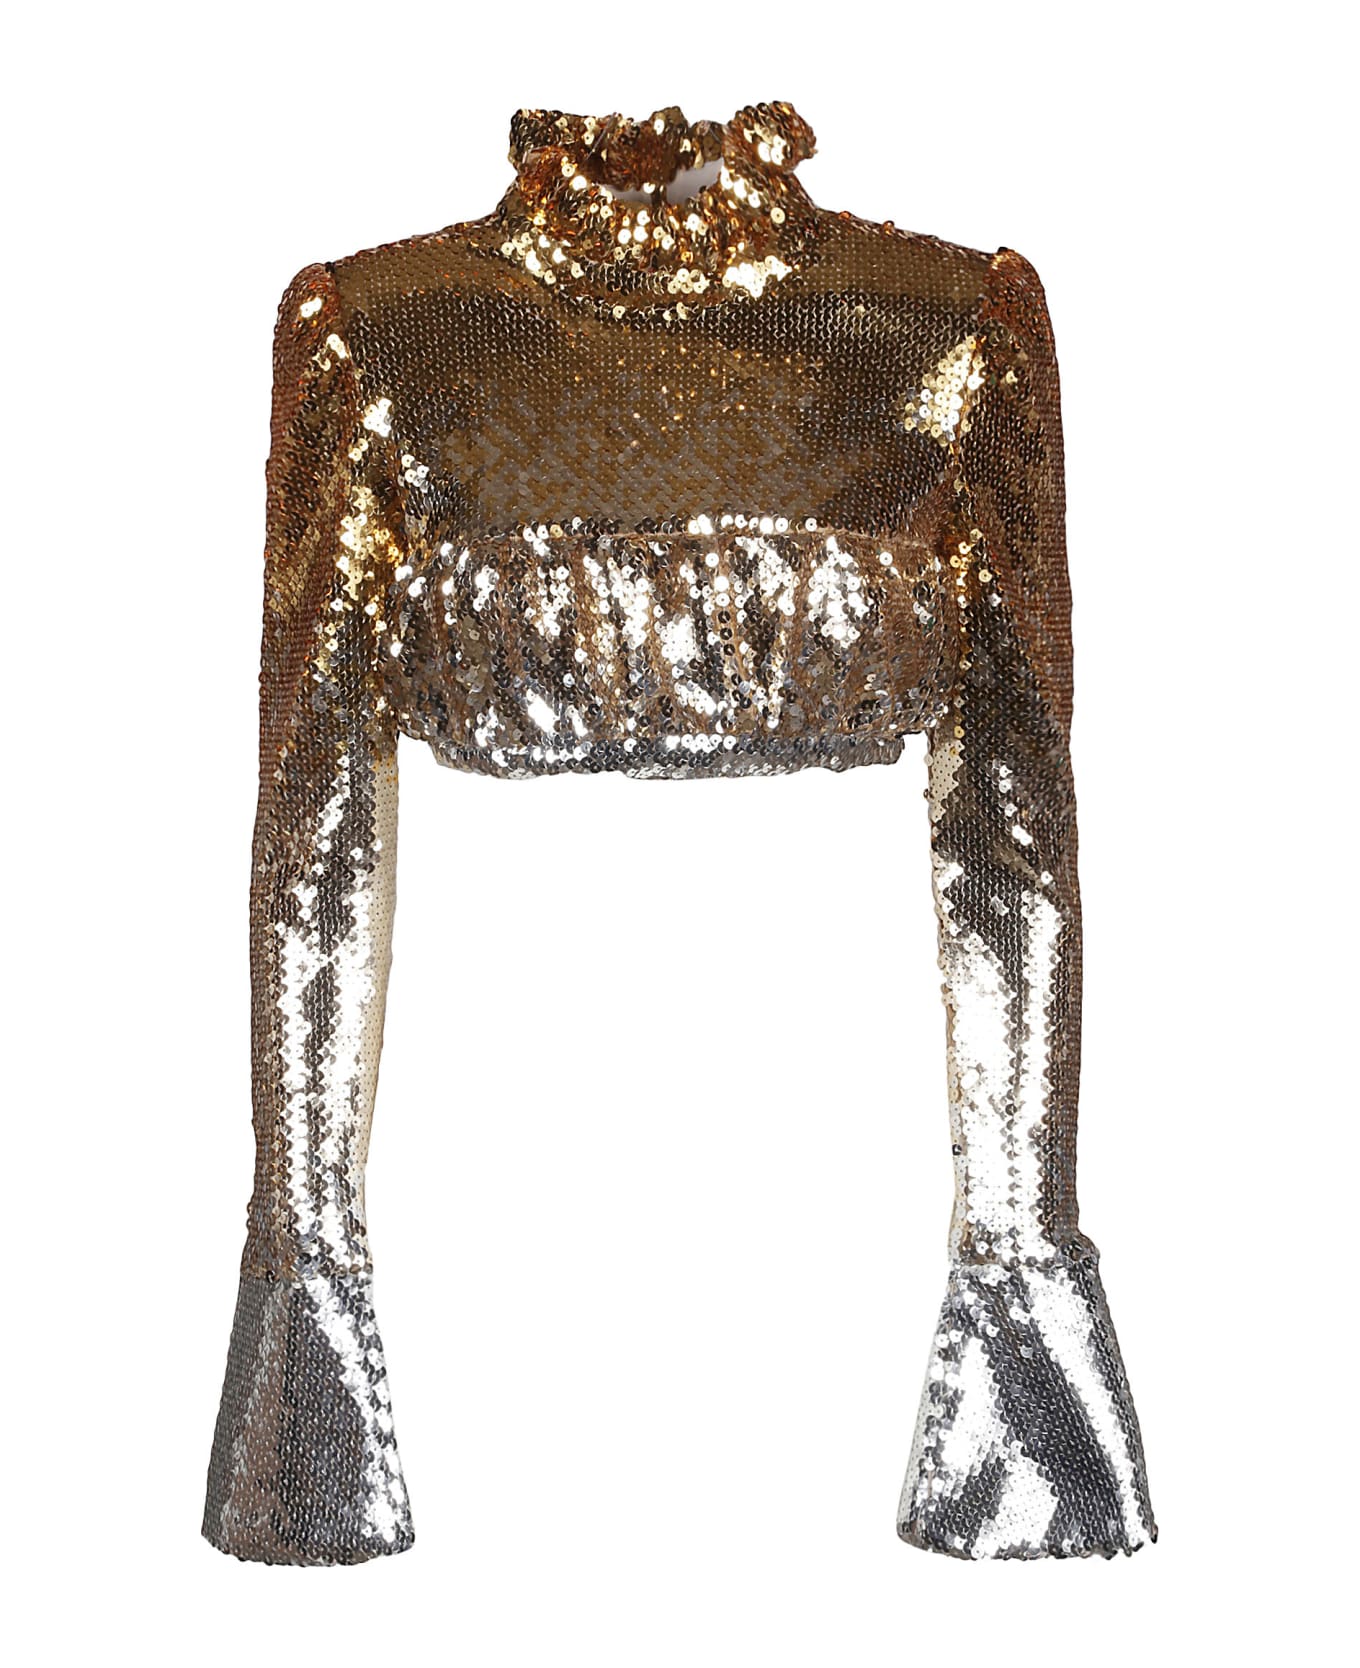 Paco Rabanne Long Sleeve Cropped Top - Gold/silver